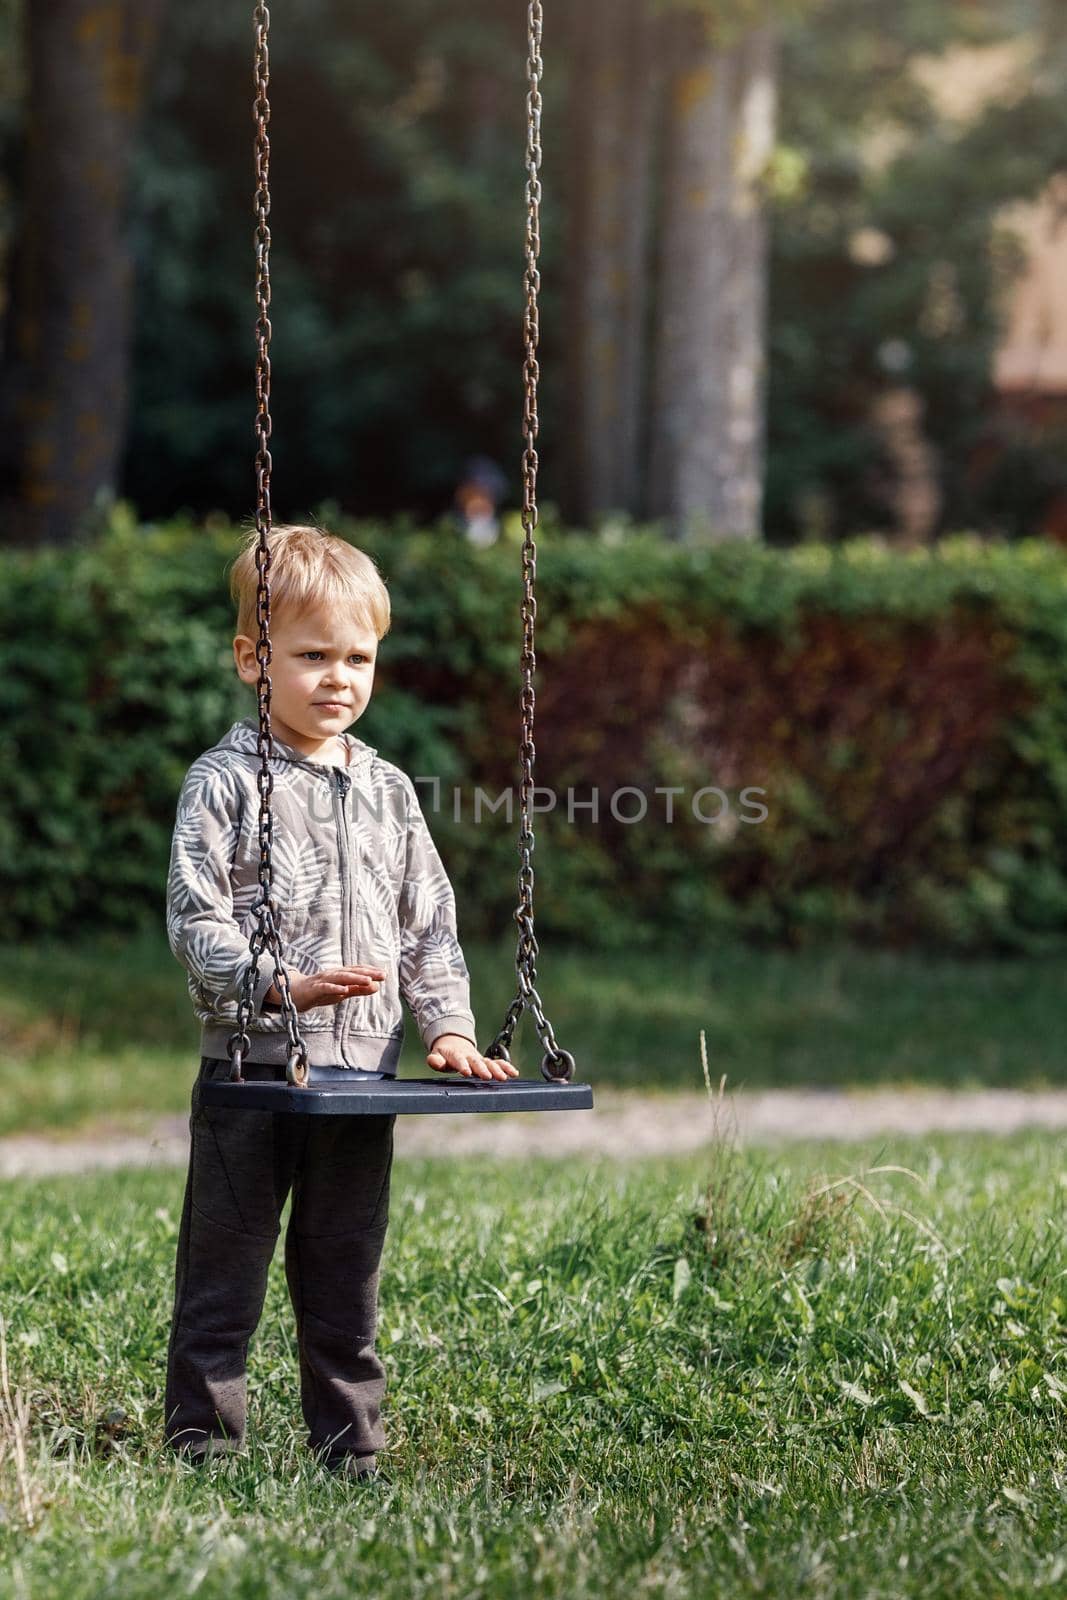 An attractive little boy stands next to a swing with chains in a city park, a child getting ready to swing. Vertical photo by Lincikas